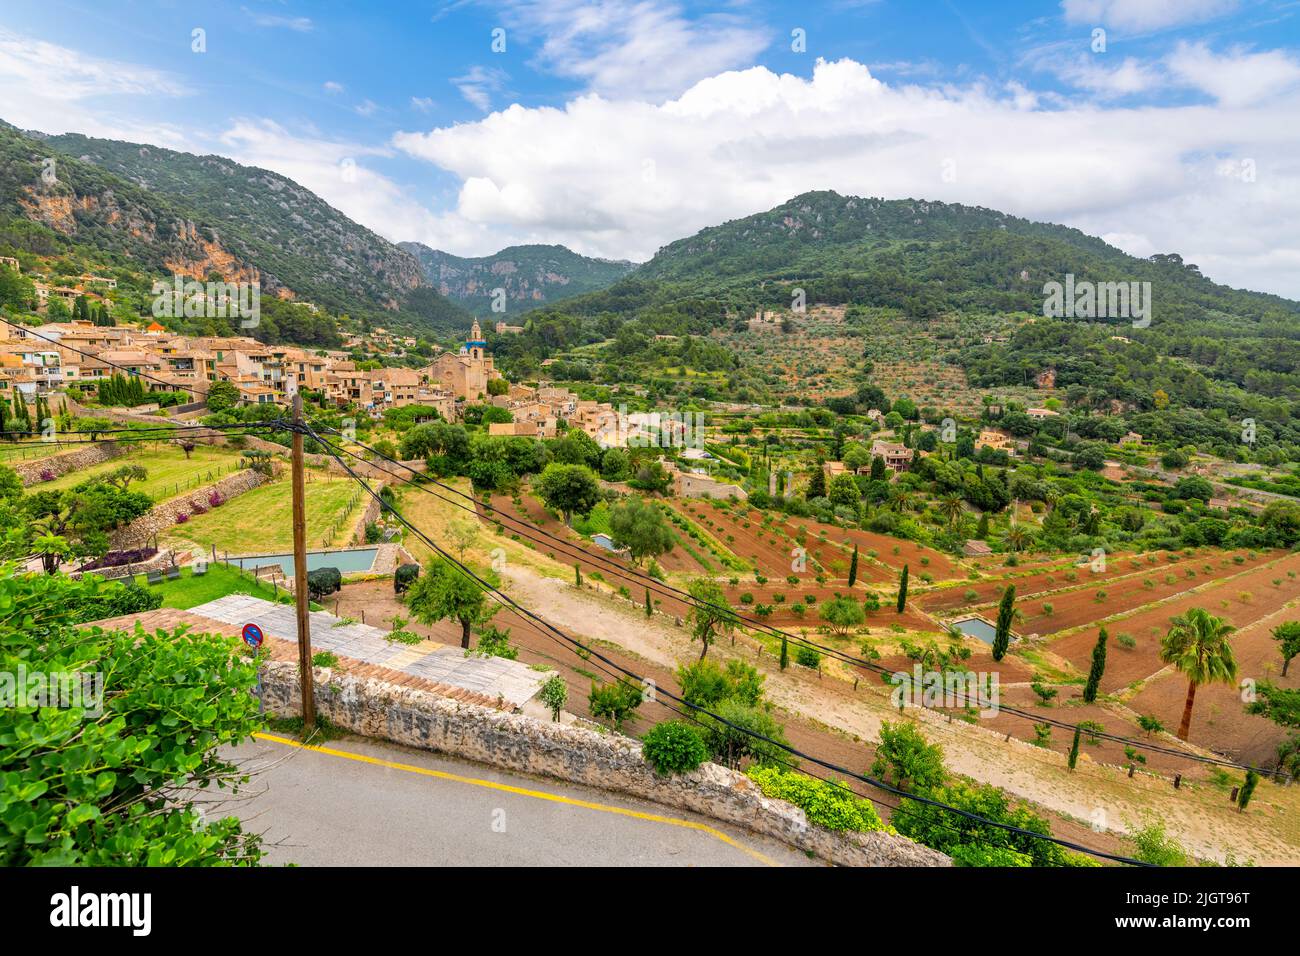 HIllside view of the Soller Valley and the picturesque villages of Valldemossa, Spain, on the island of Mallorca. Stock Photo